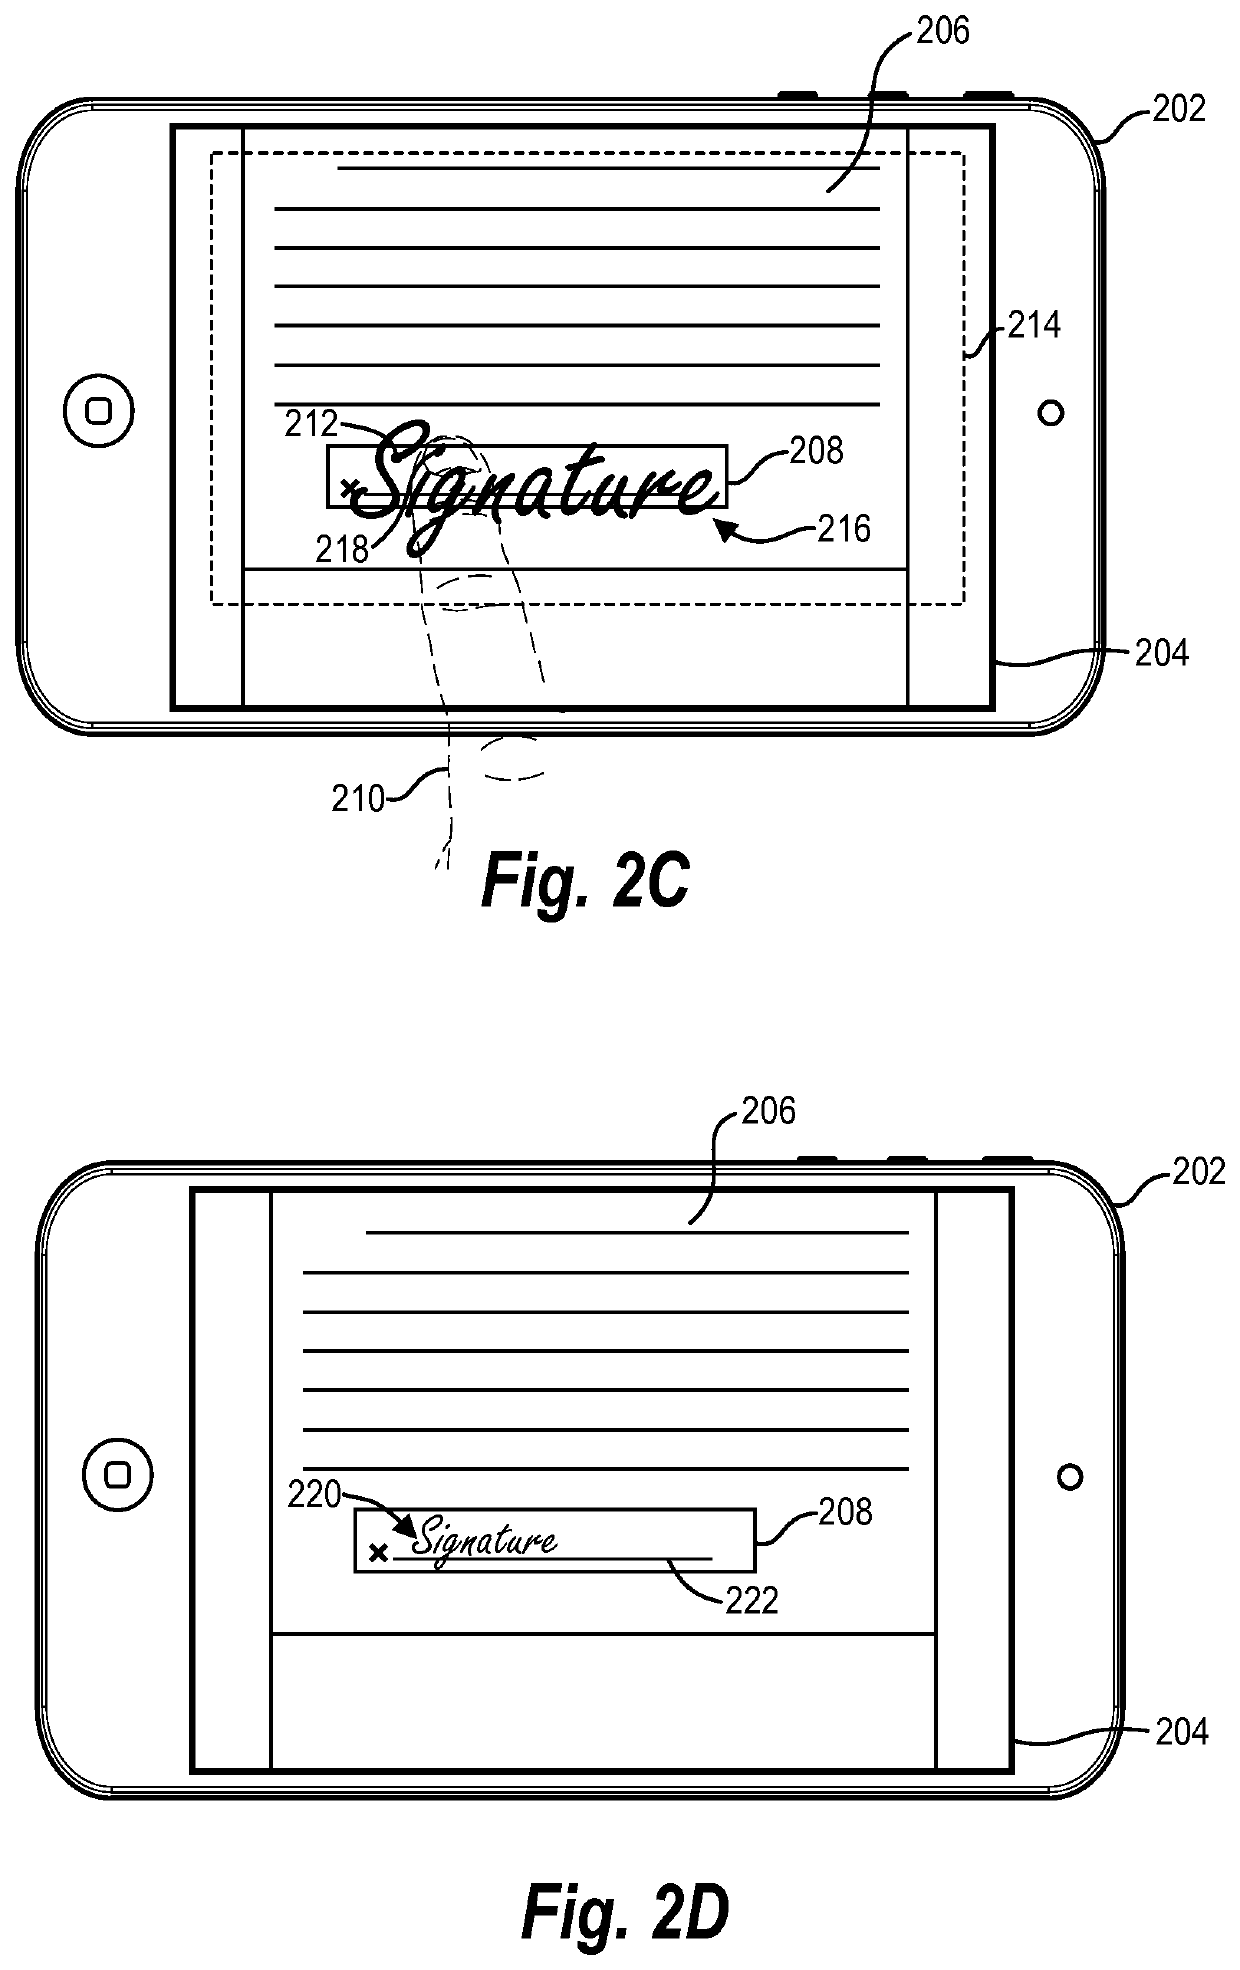 Capturing electronic signatures using an expanded interface area